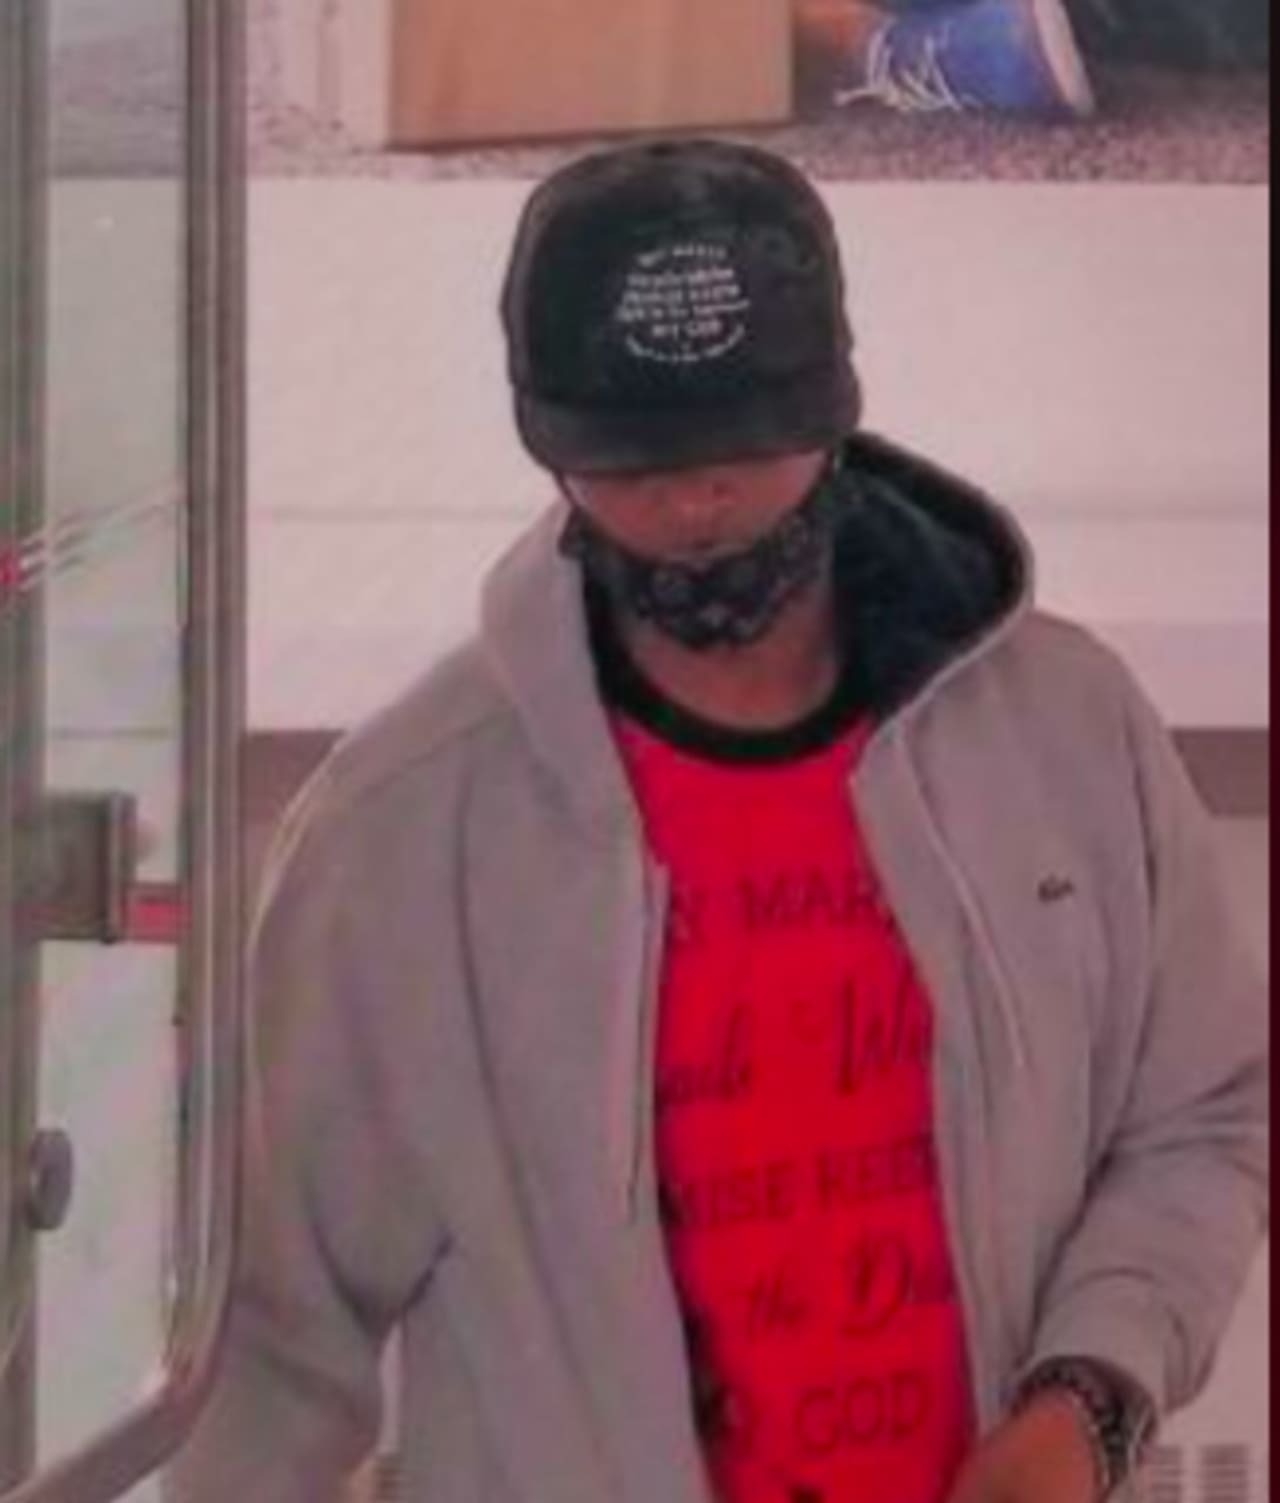 This man is accused of spitting in the face of a bank worker who asked him to adjust his face mask.